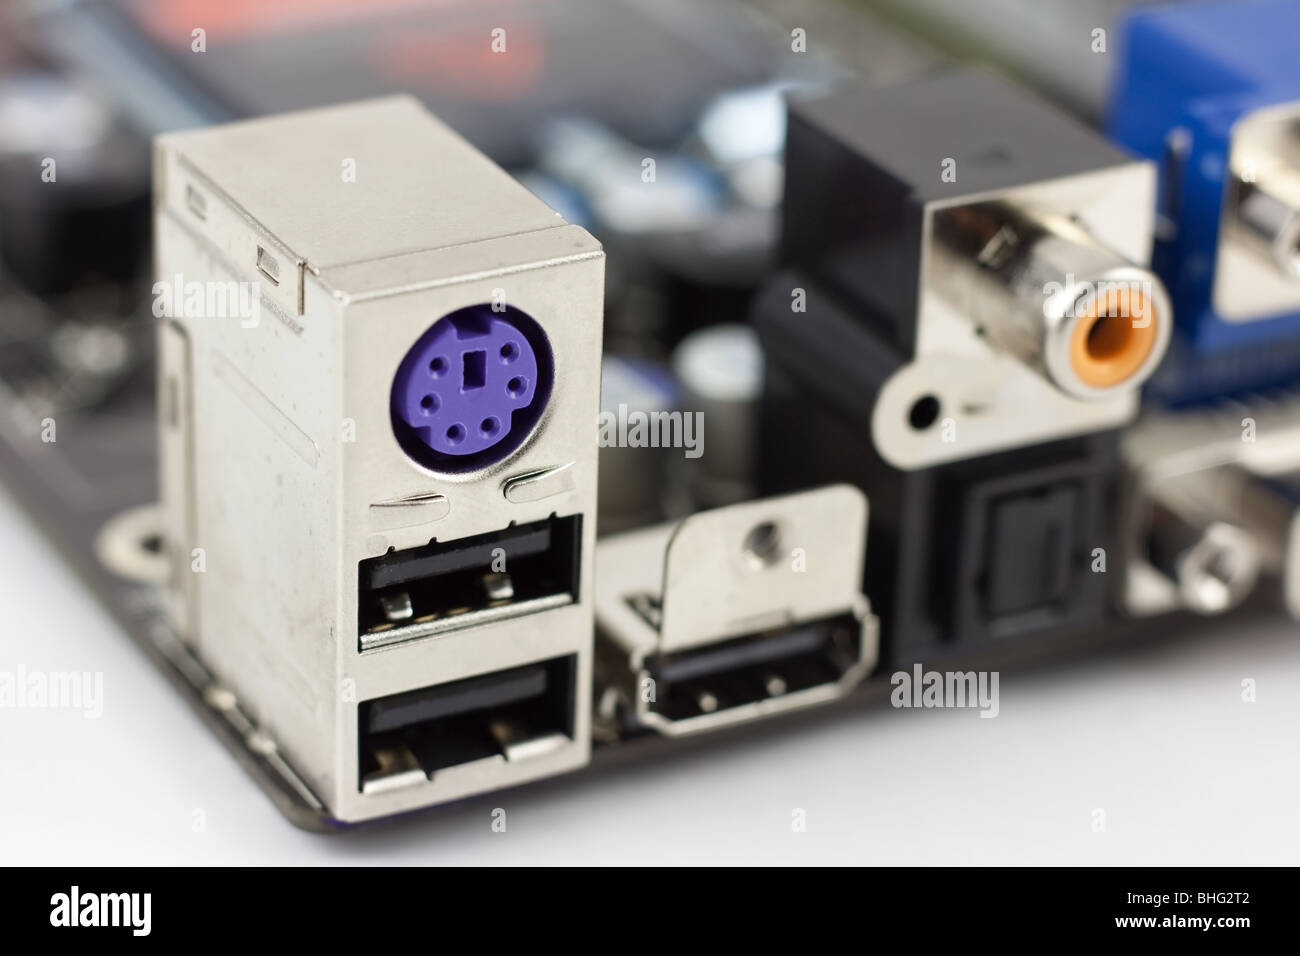 Keyword, mouse, PS/2, USB, HDMI, SPDIF, coaxial, optical, ports on the computer mainboard Stock Photo